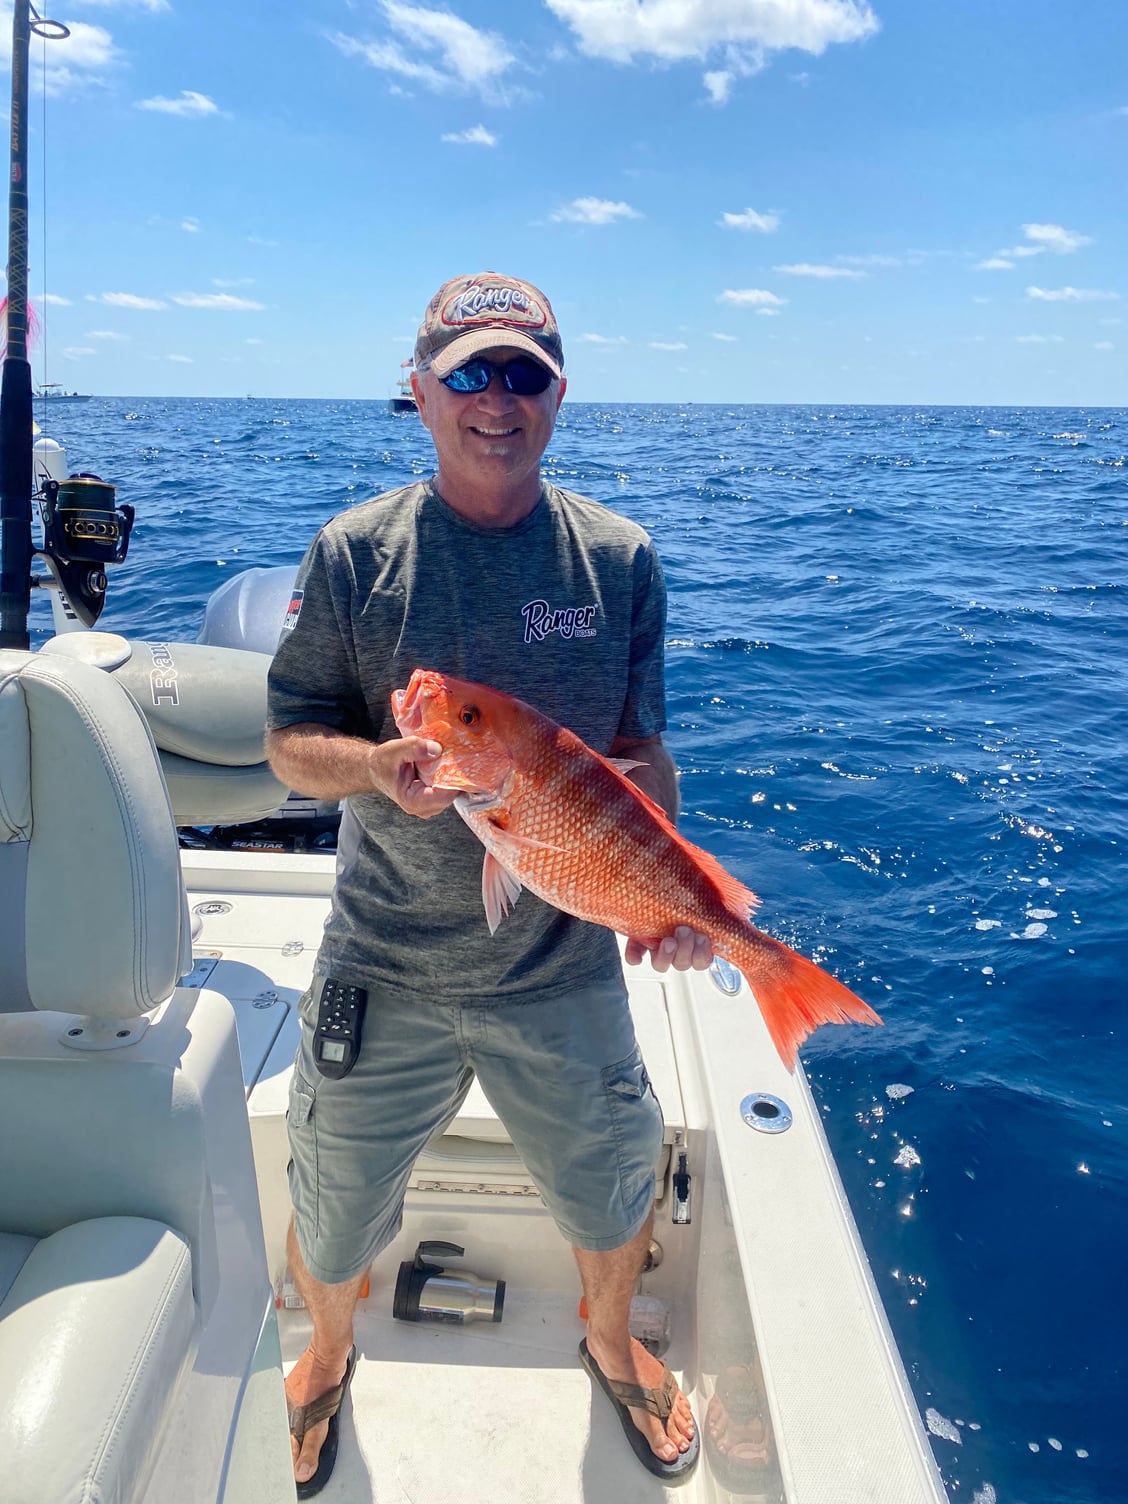 snapper fishing Freeport Texas - The Hull Truth - Boating and